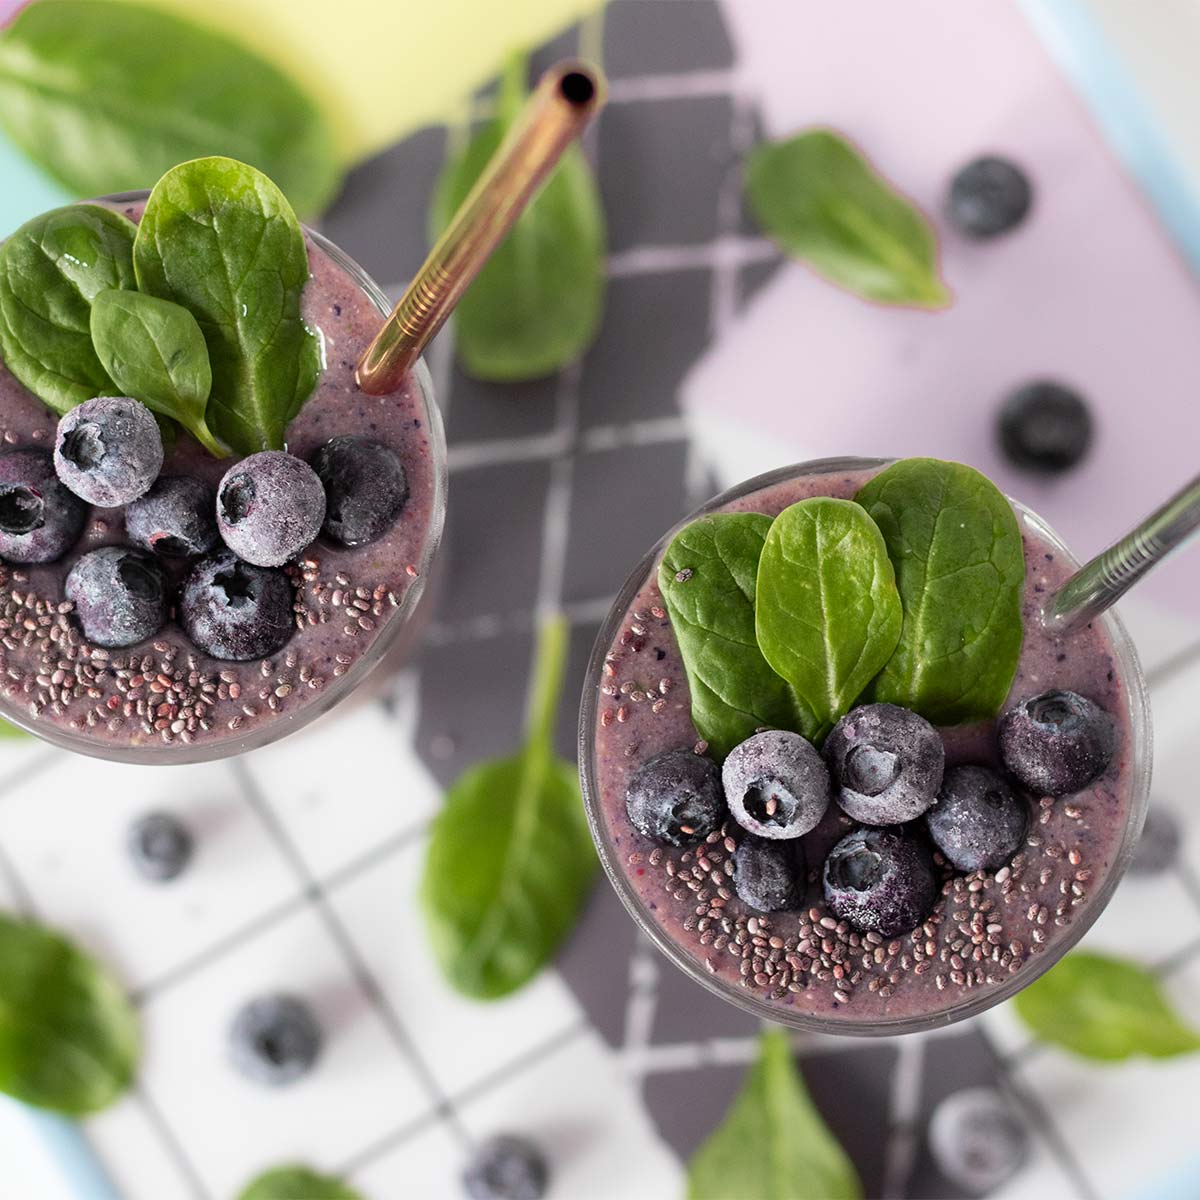 Blueberry banana spinach smoothie without yogurt as a healthy weight-loss breakfast drink